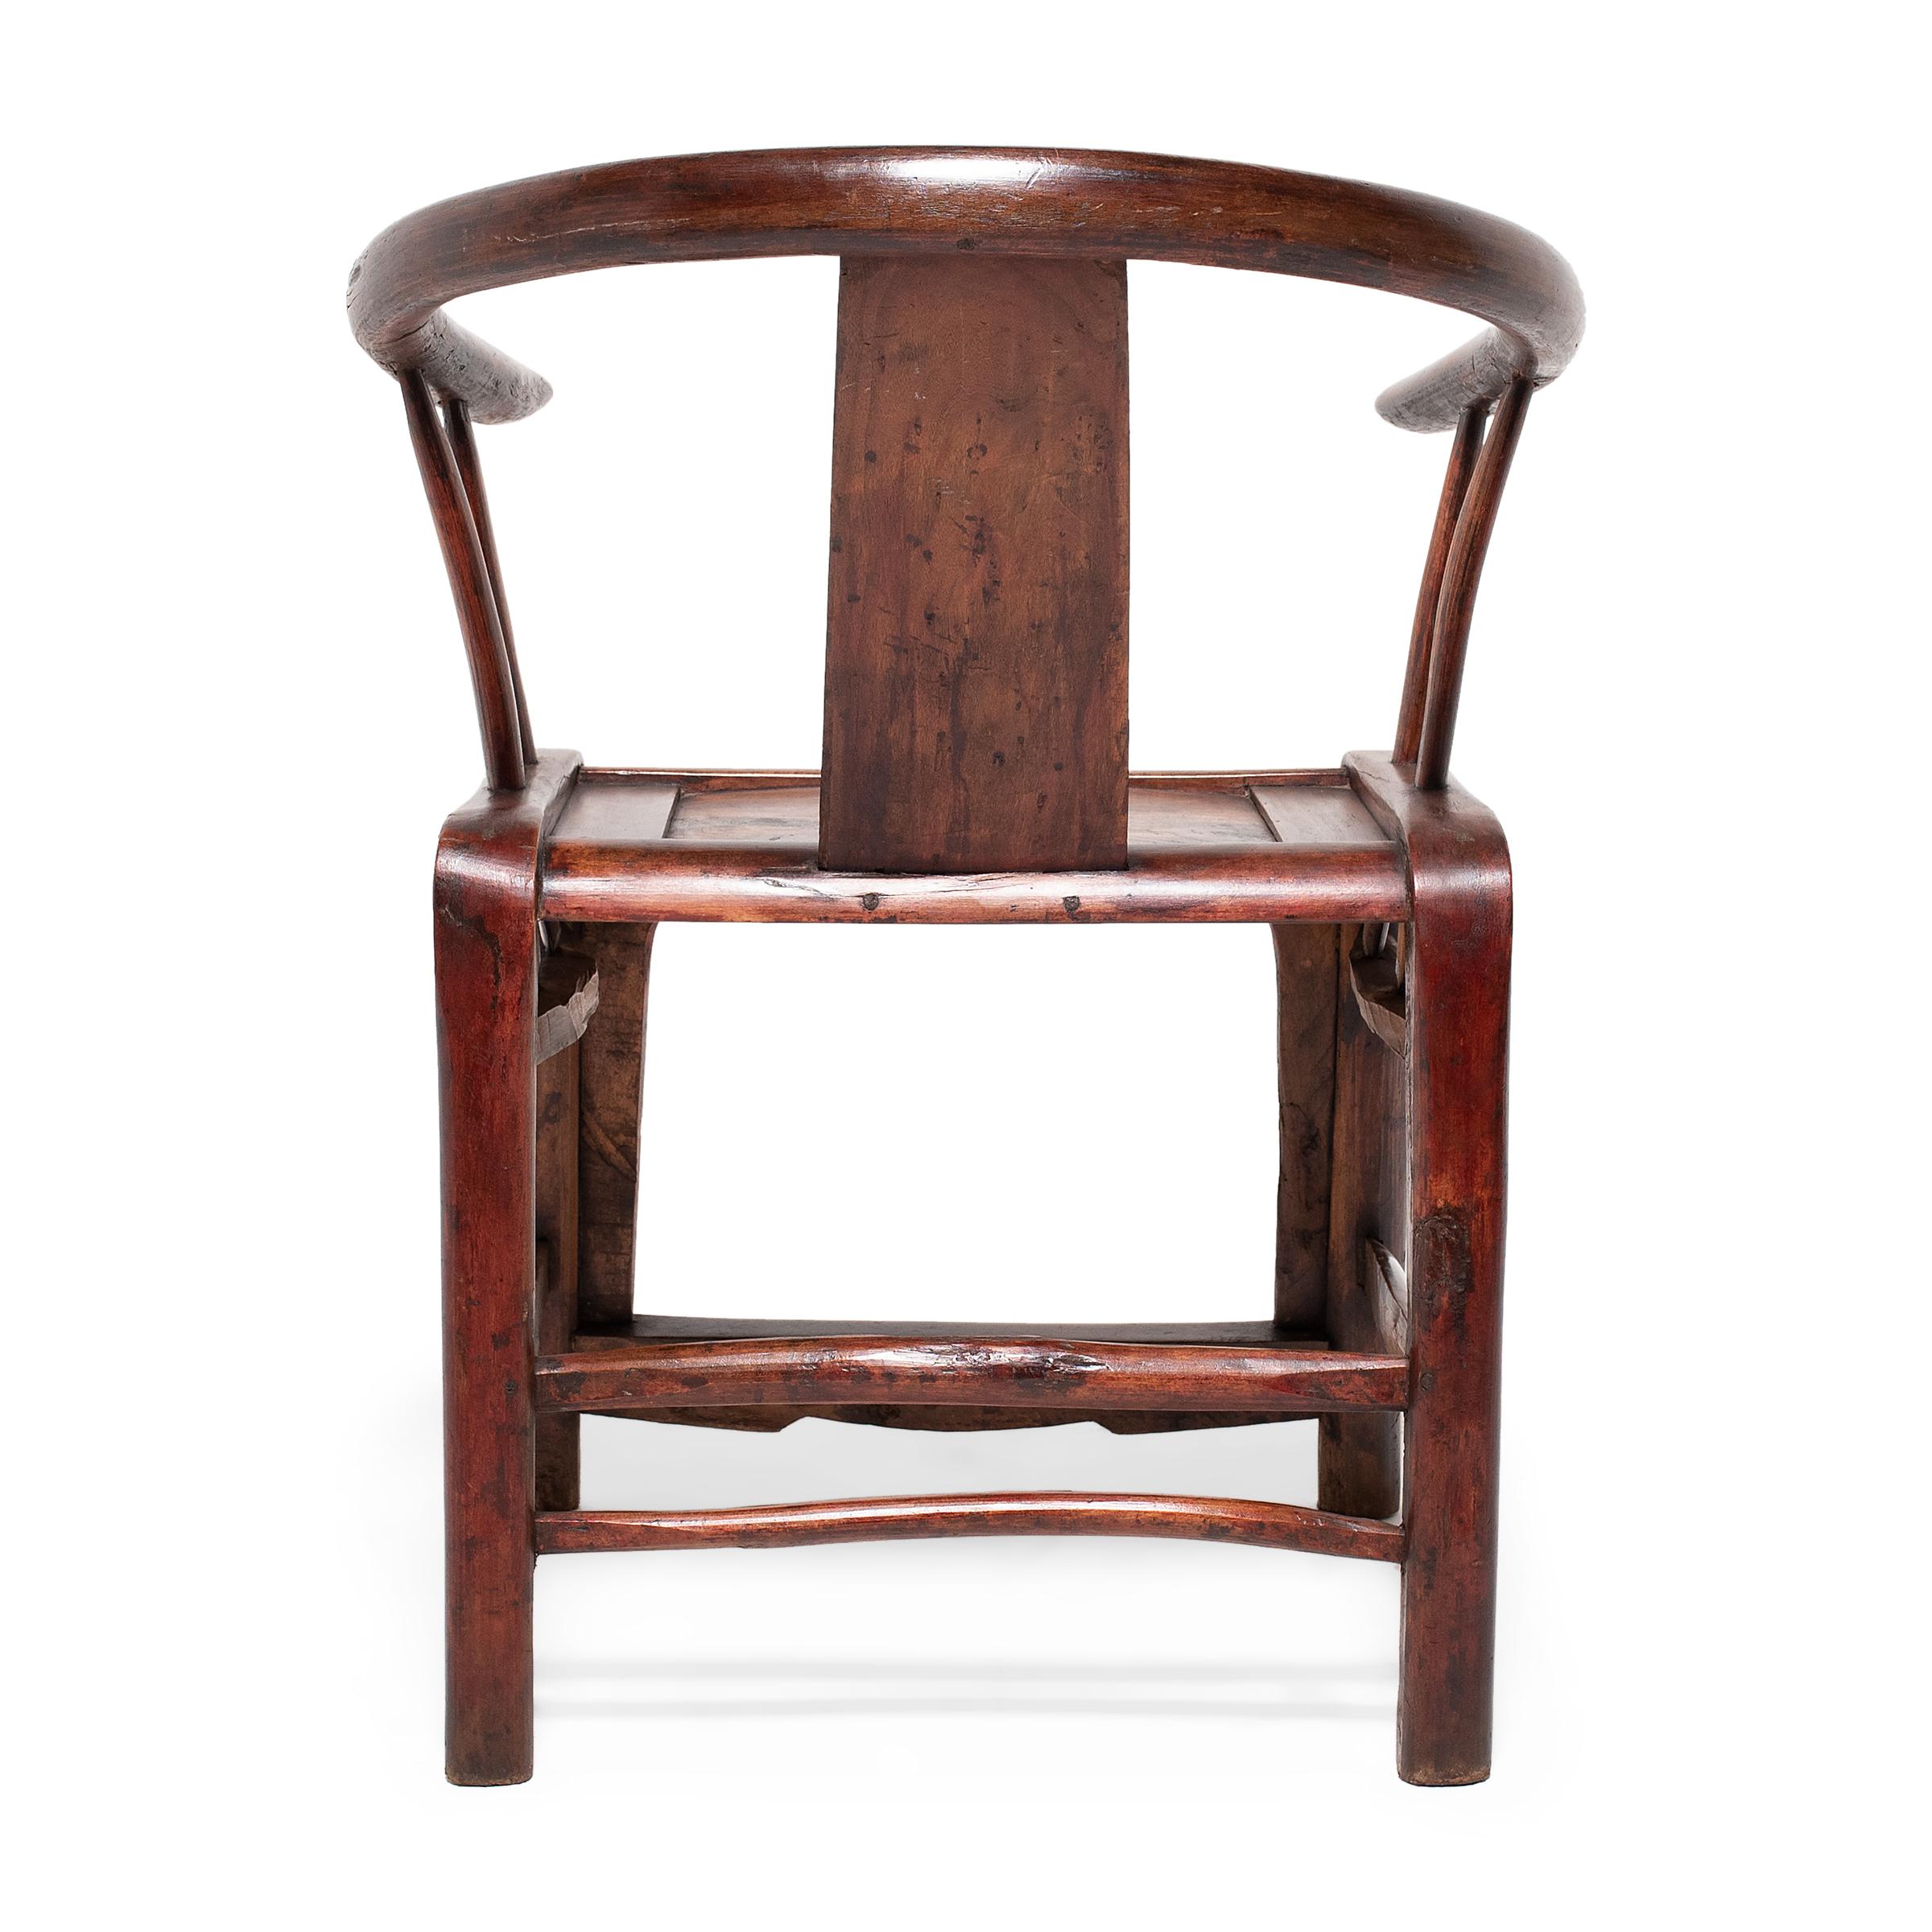 Carved Chinese Lacquered Roundback Chair, c. 1850 For Sale